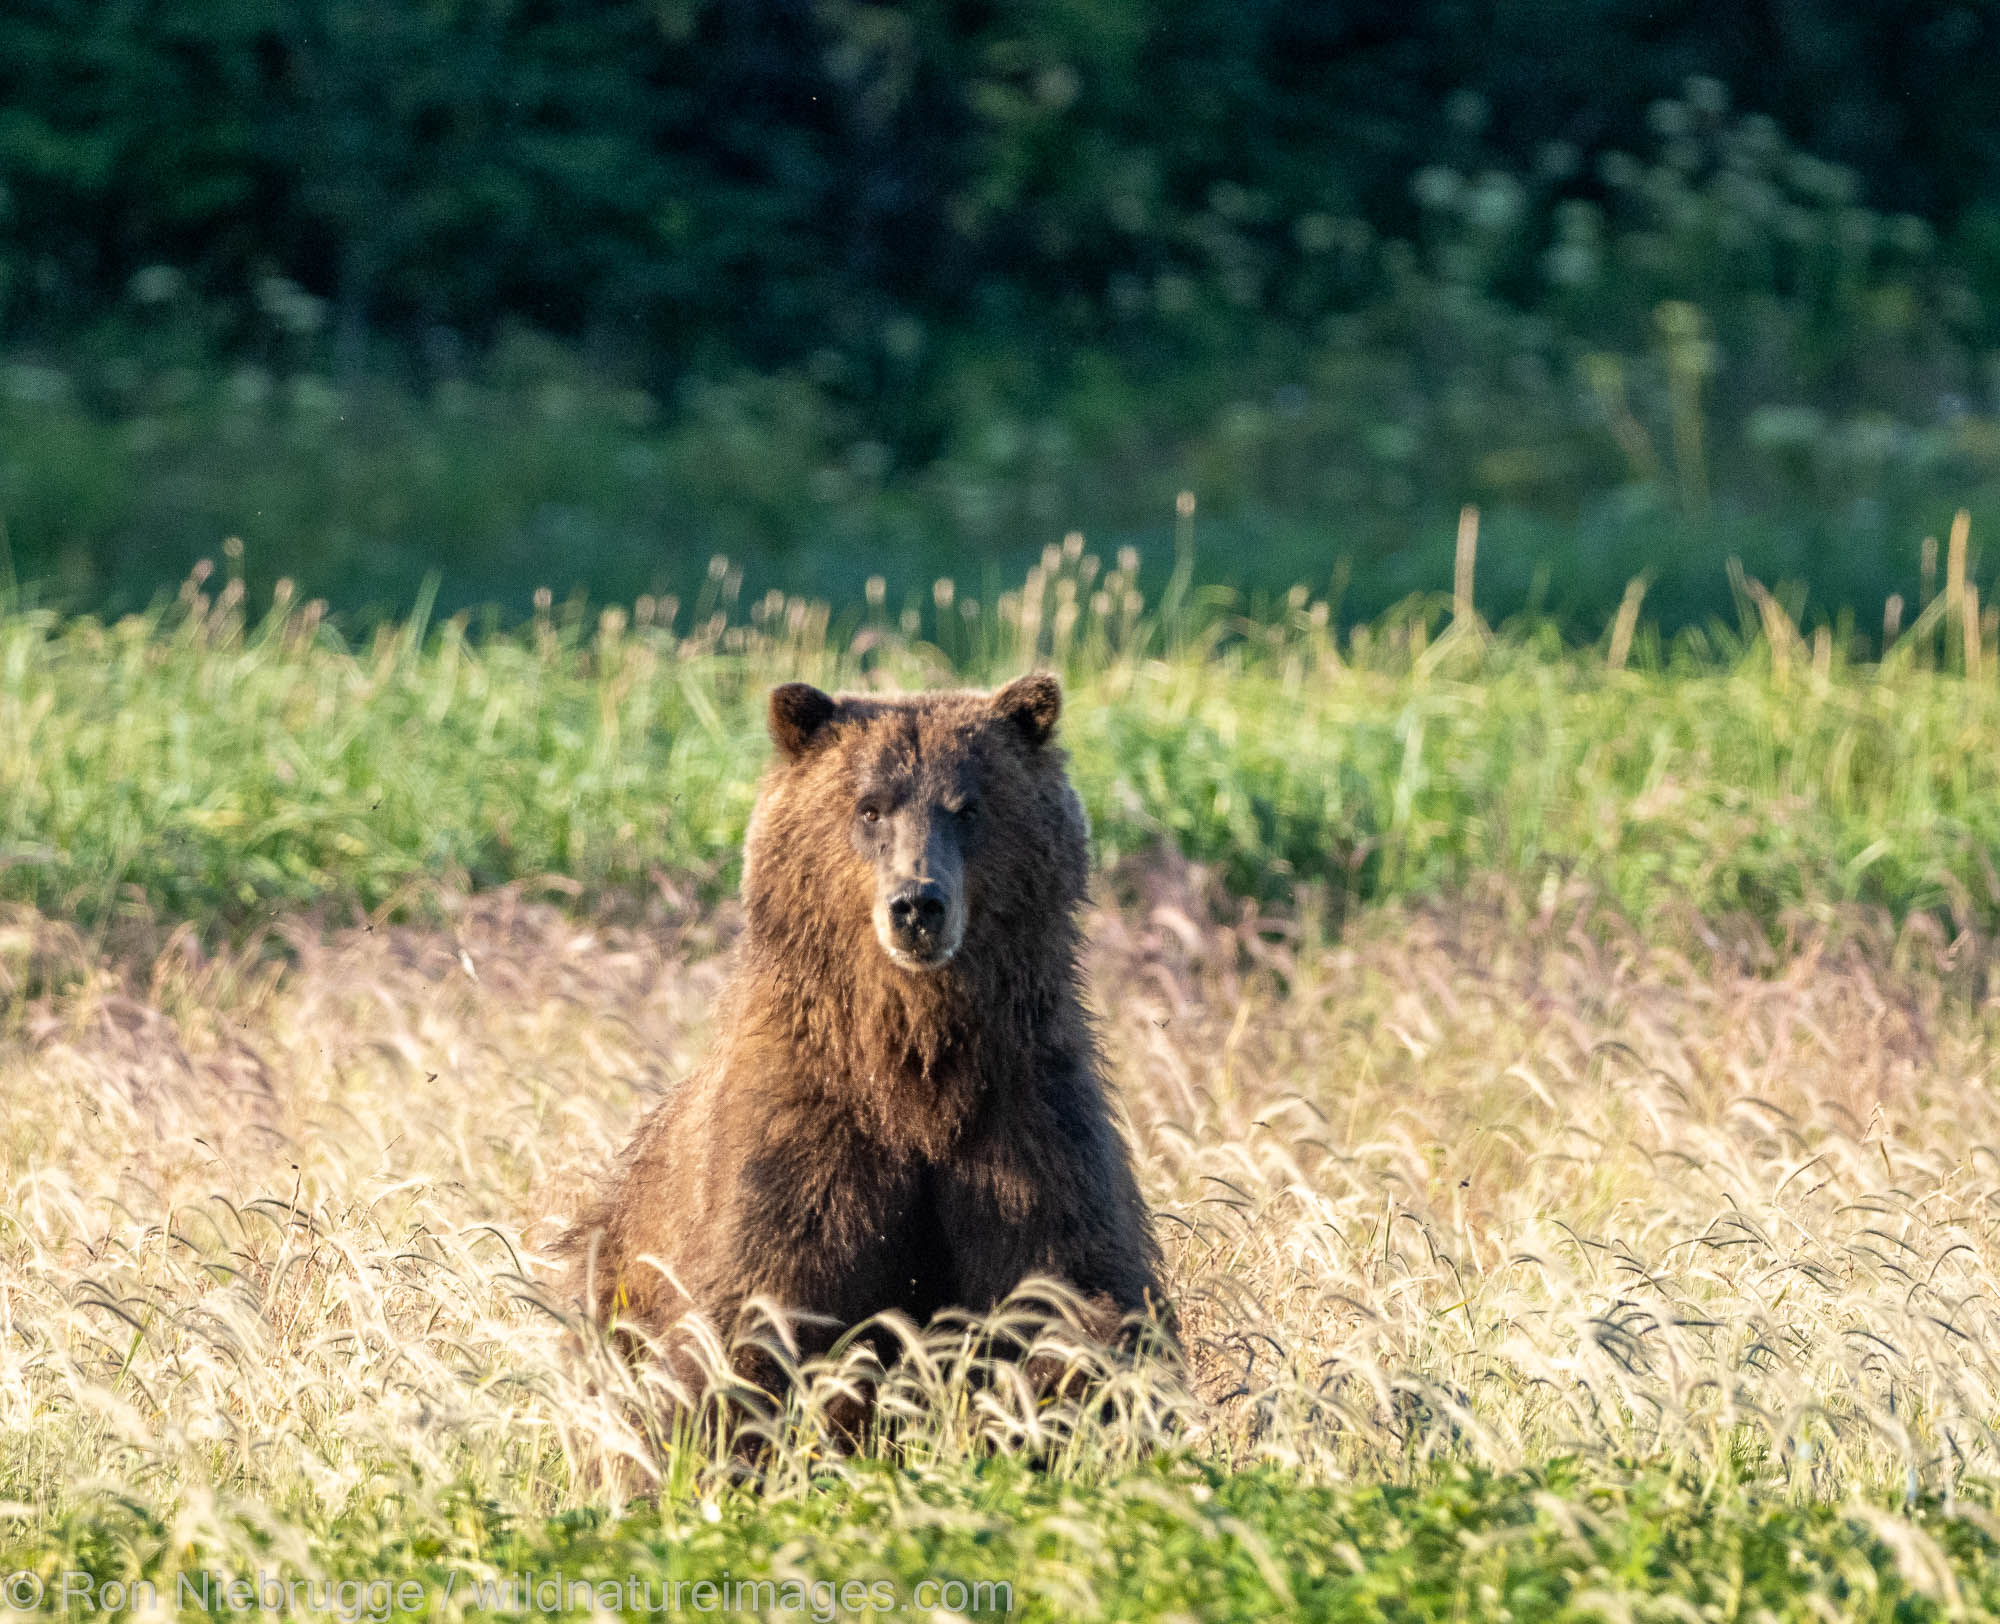 The Brown bear that came running at us fortunately came to a quick stop!